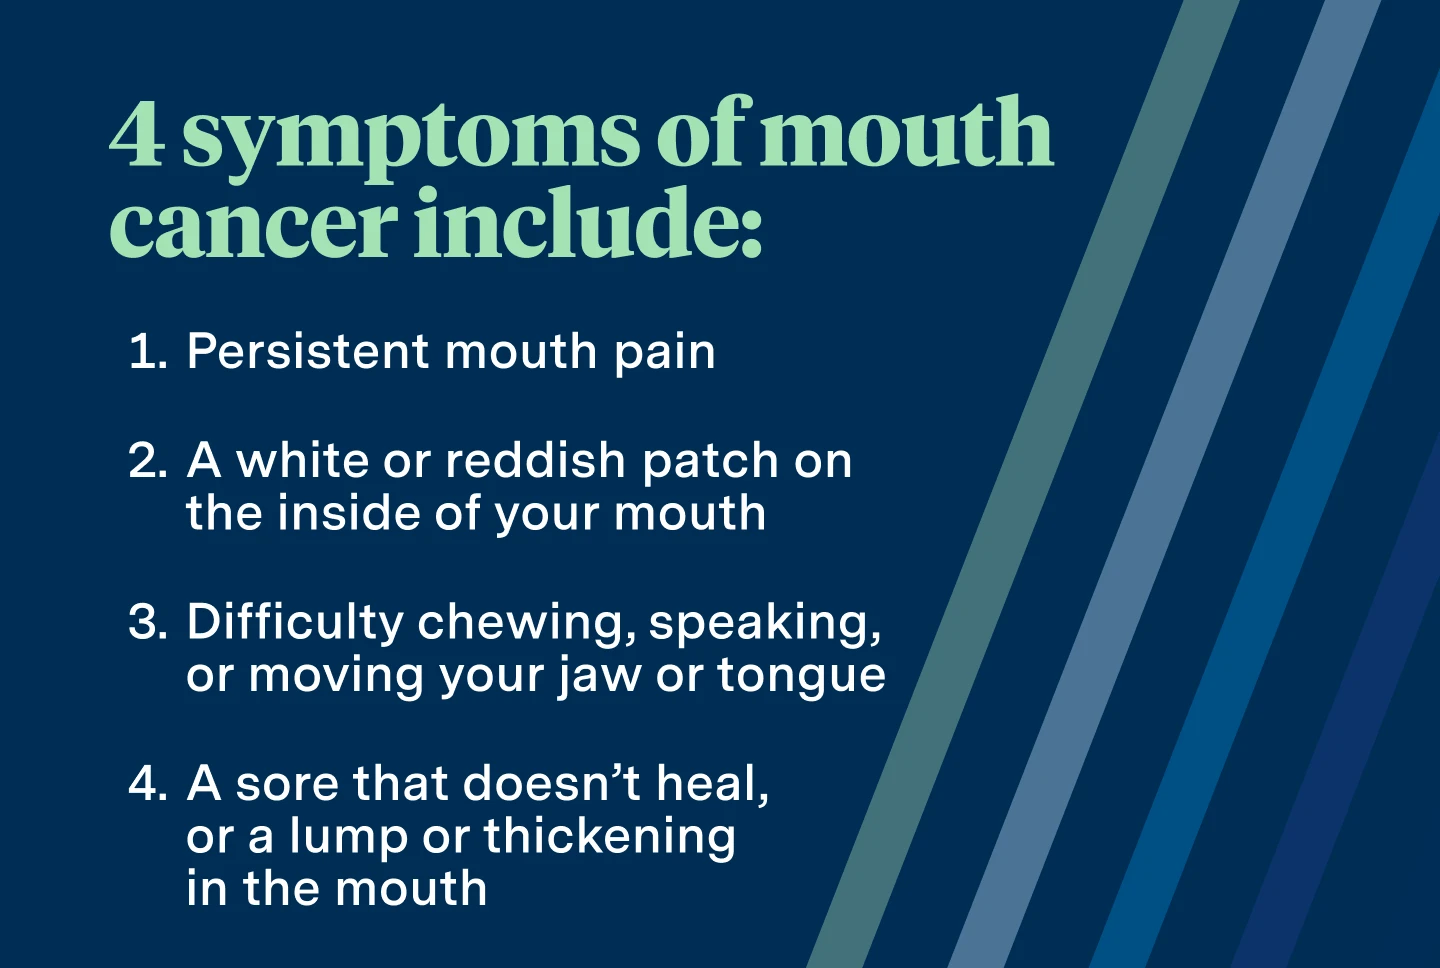 4 symptoms of mouth cancer include: persistent mouth pain, a white or reddish patch on the inside of your mouth, difficulty chewing, speaking, or moving your jaw or tongue, a sore that doesn't heal, or a lump or thickening in the mouth. 